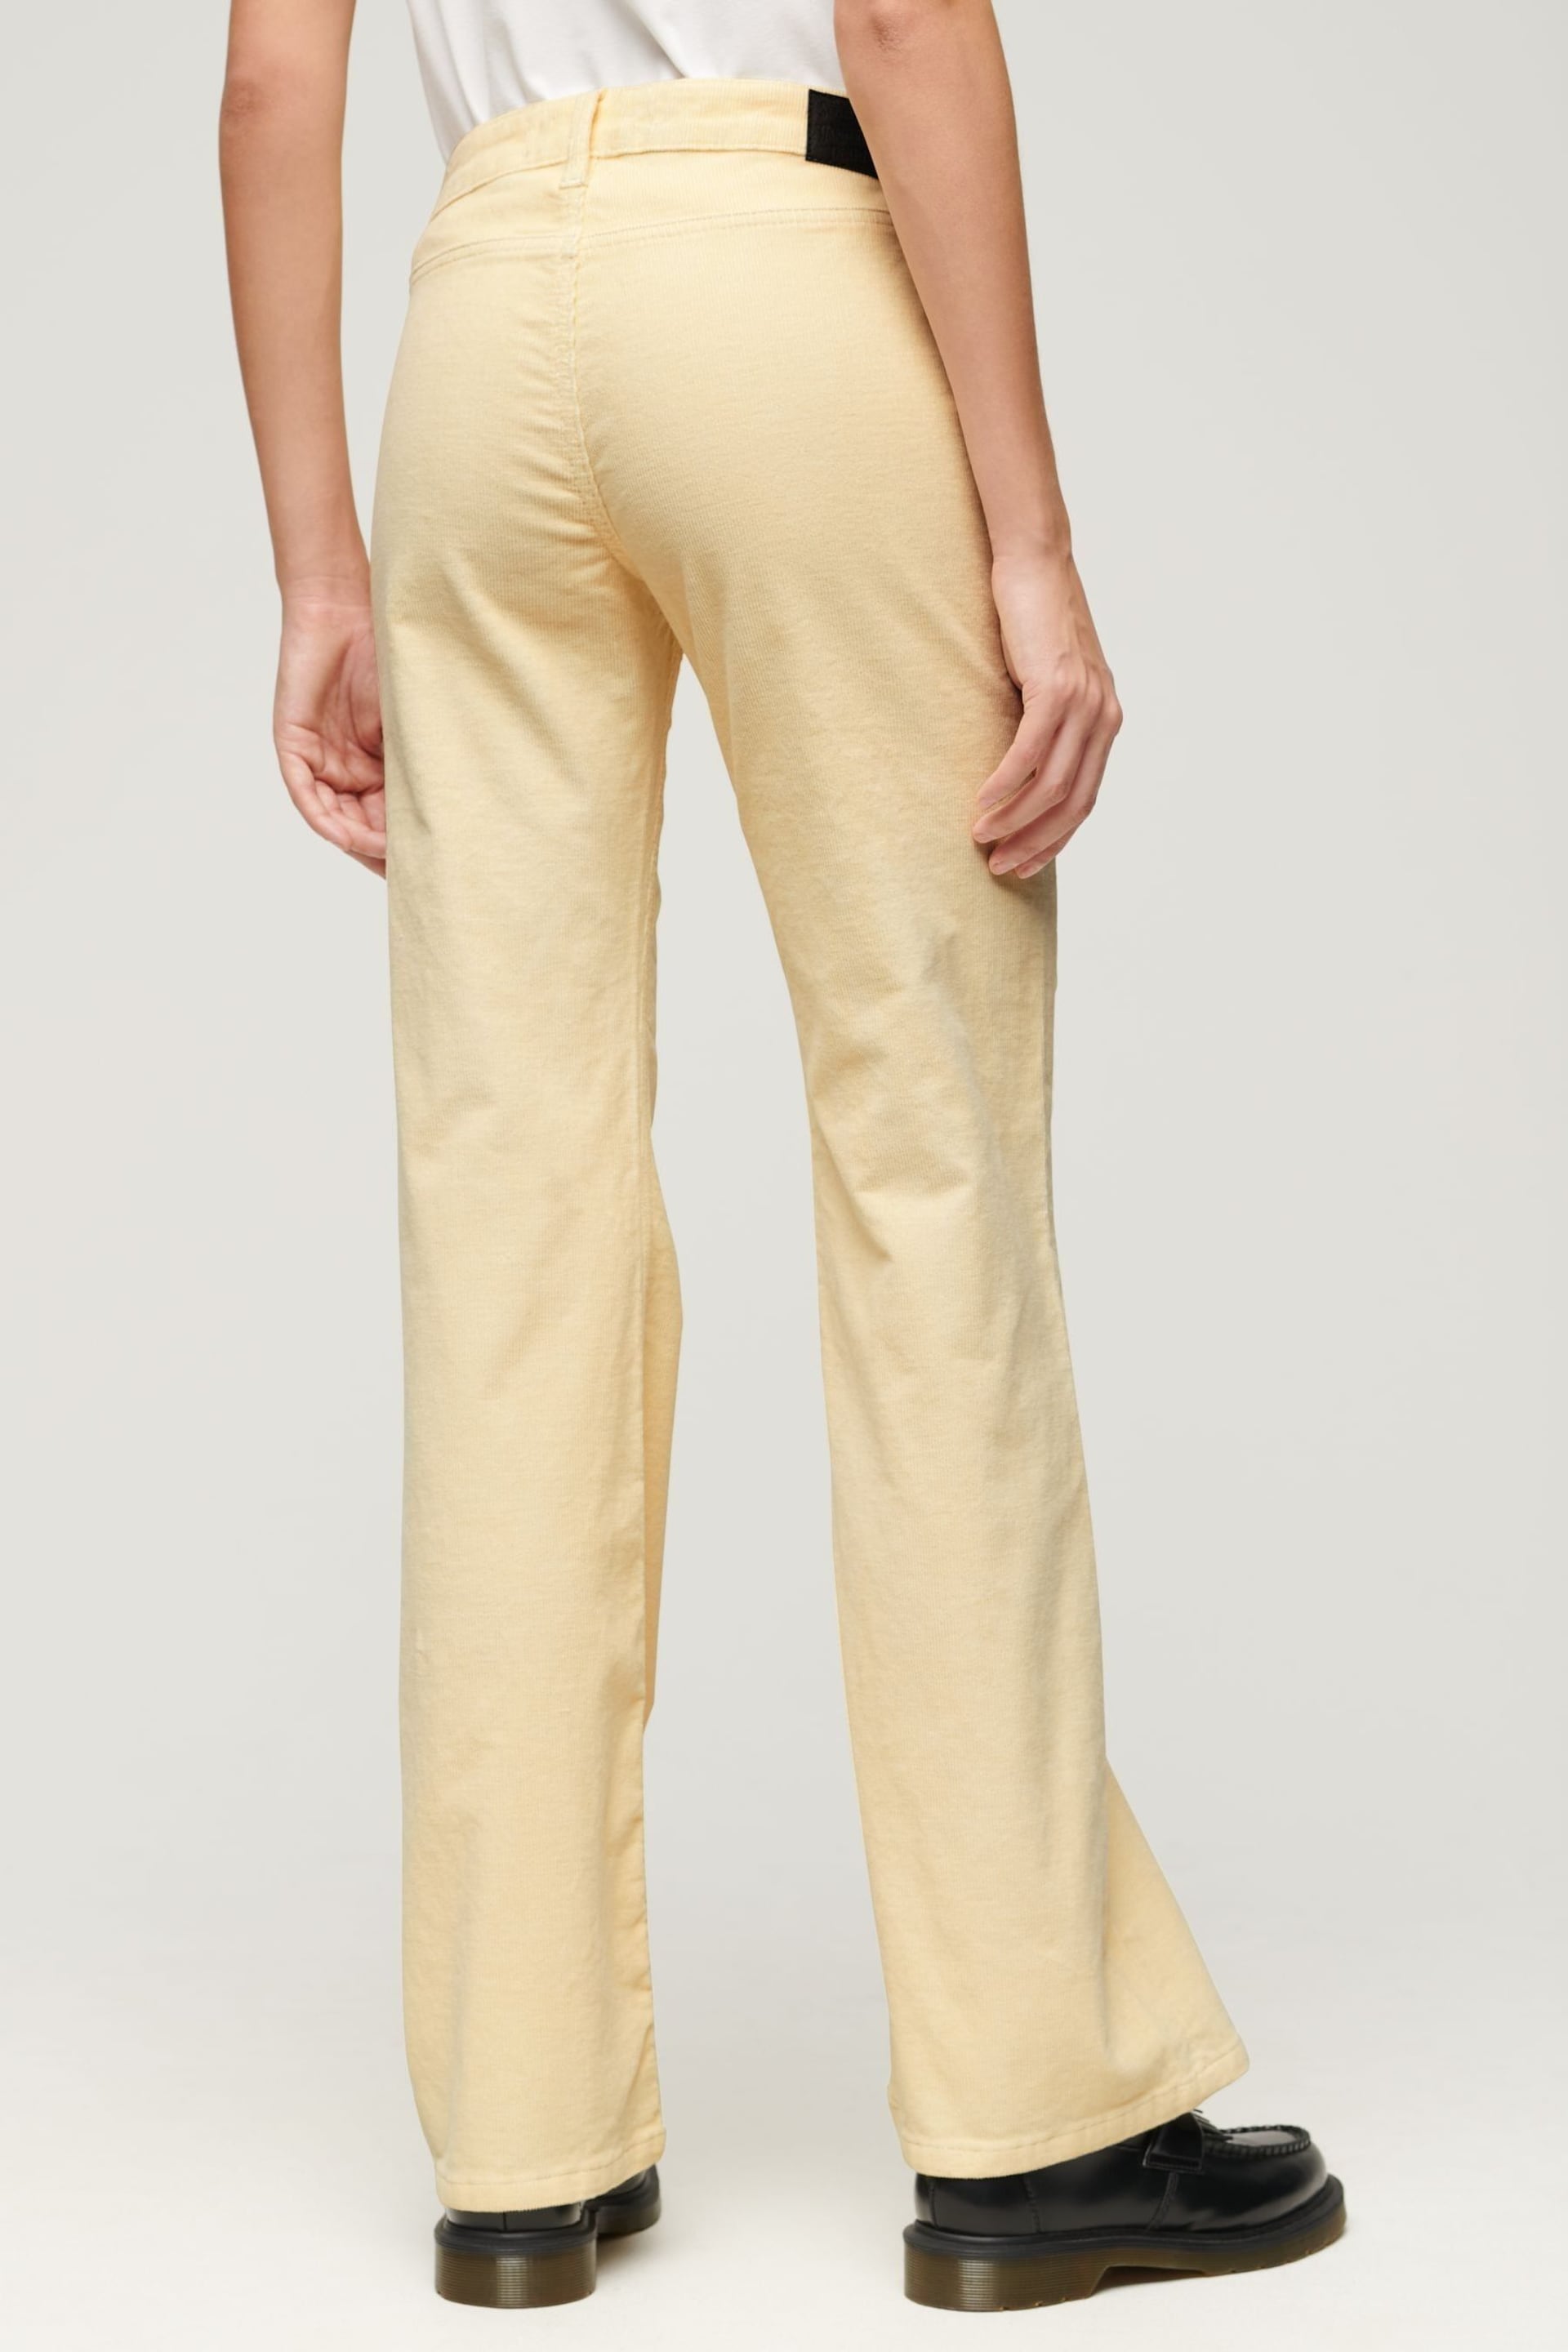 Superdry Cream Low Rise Cord Flare Jeans - Image 3 of 5